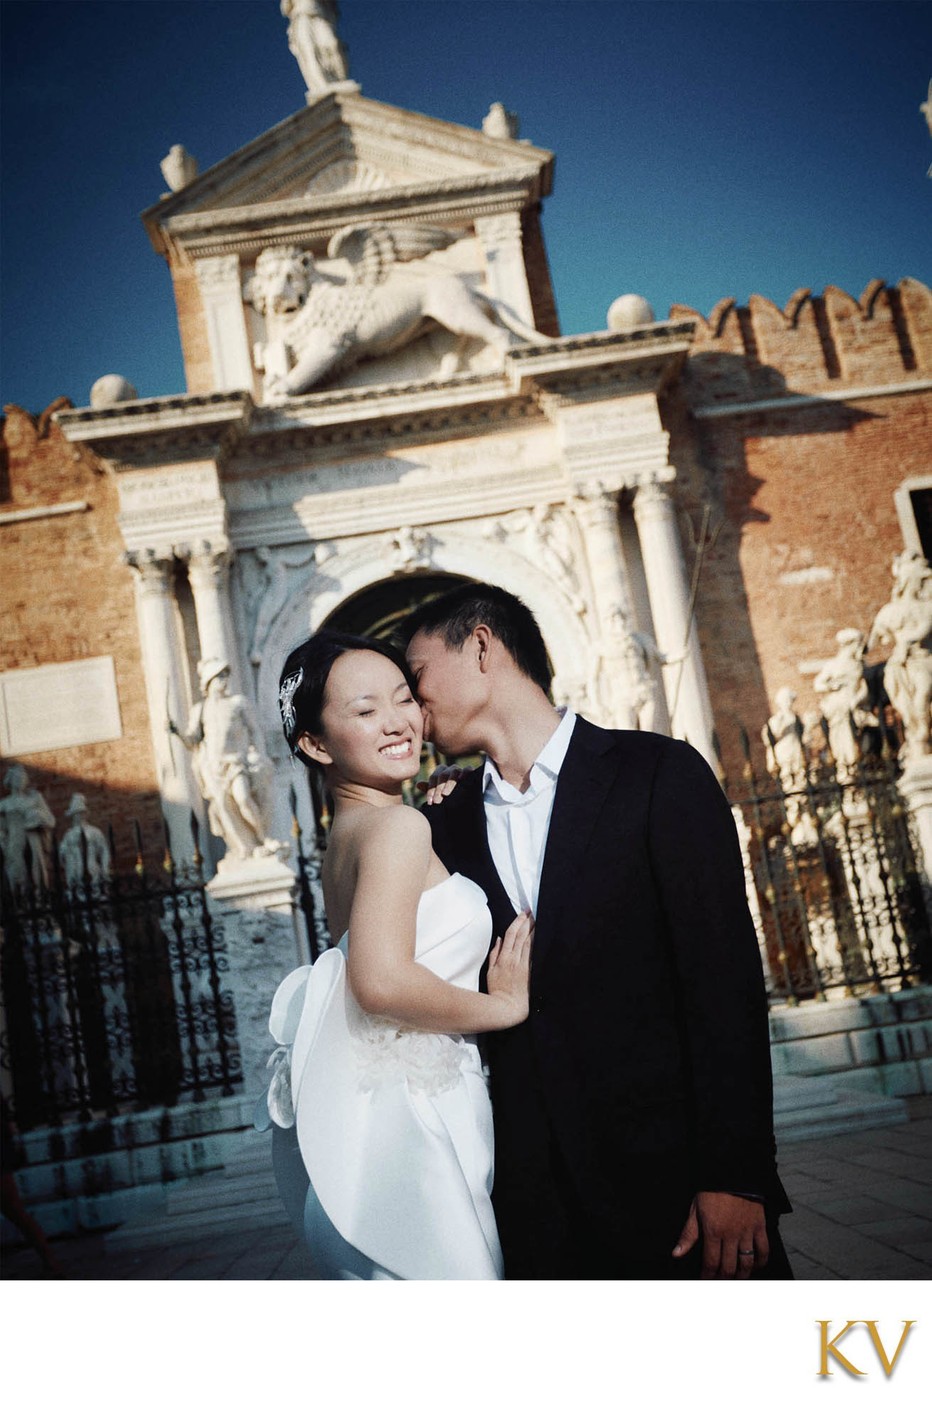 A sloppy kiss for his Thai bride in Arzenal, Venice